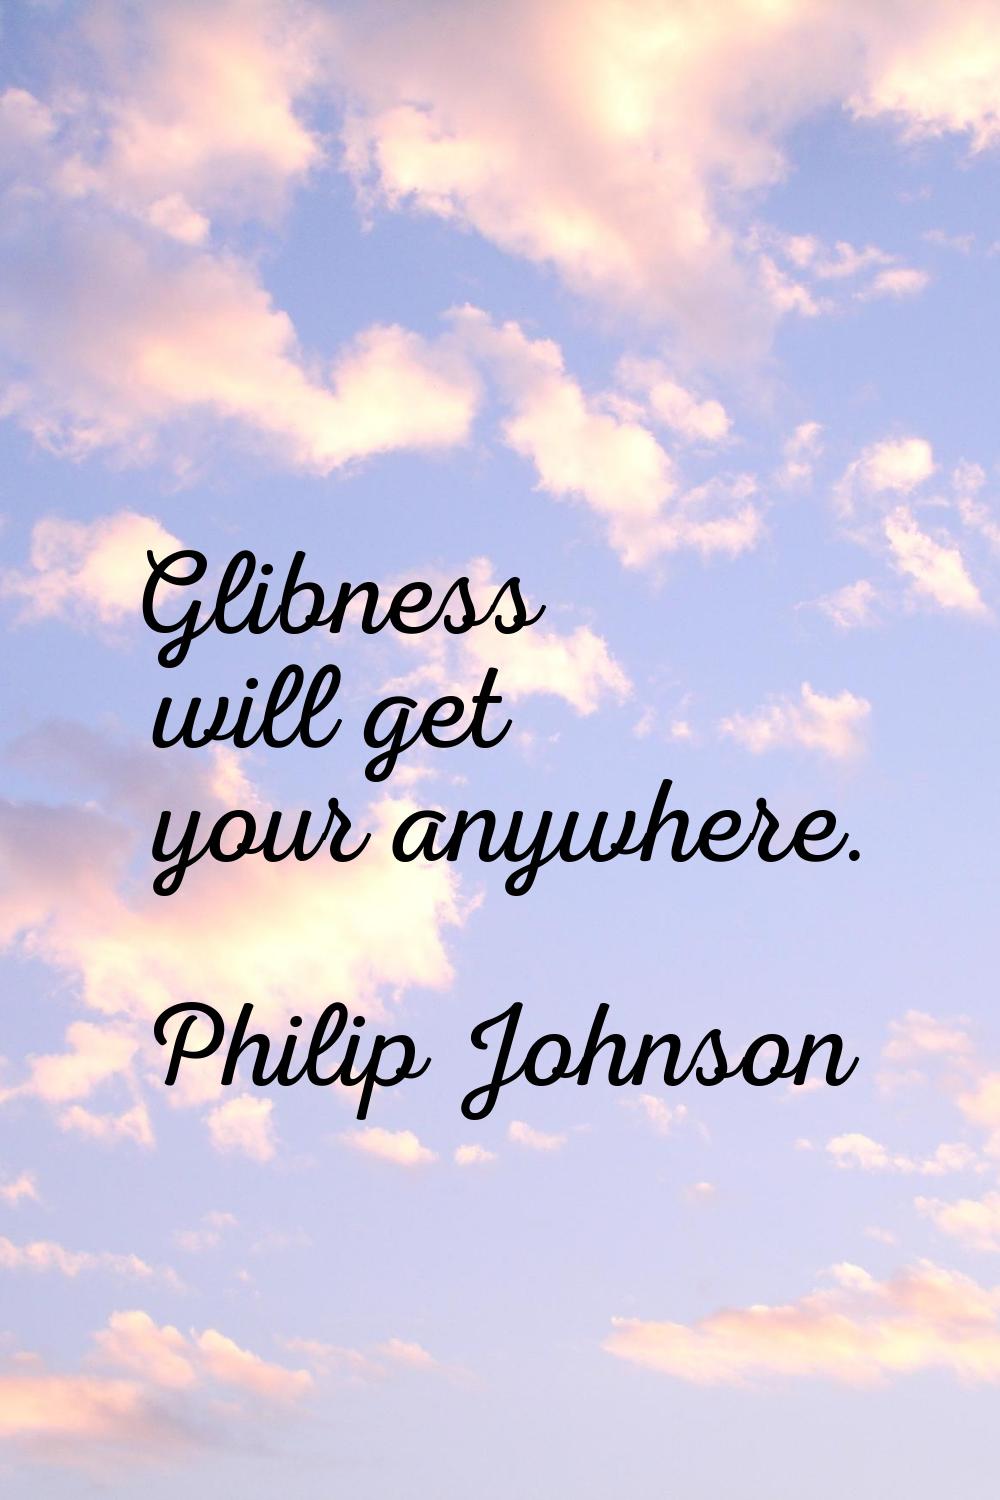 Glibness will get your anywhere.